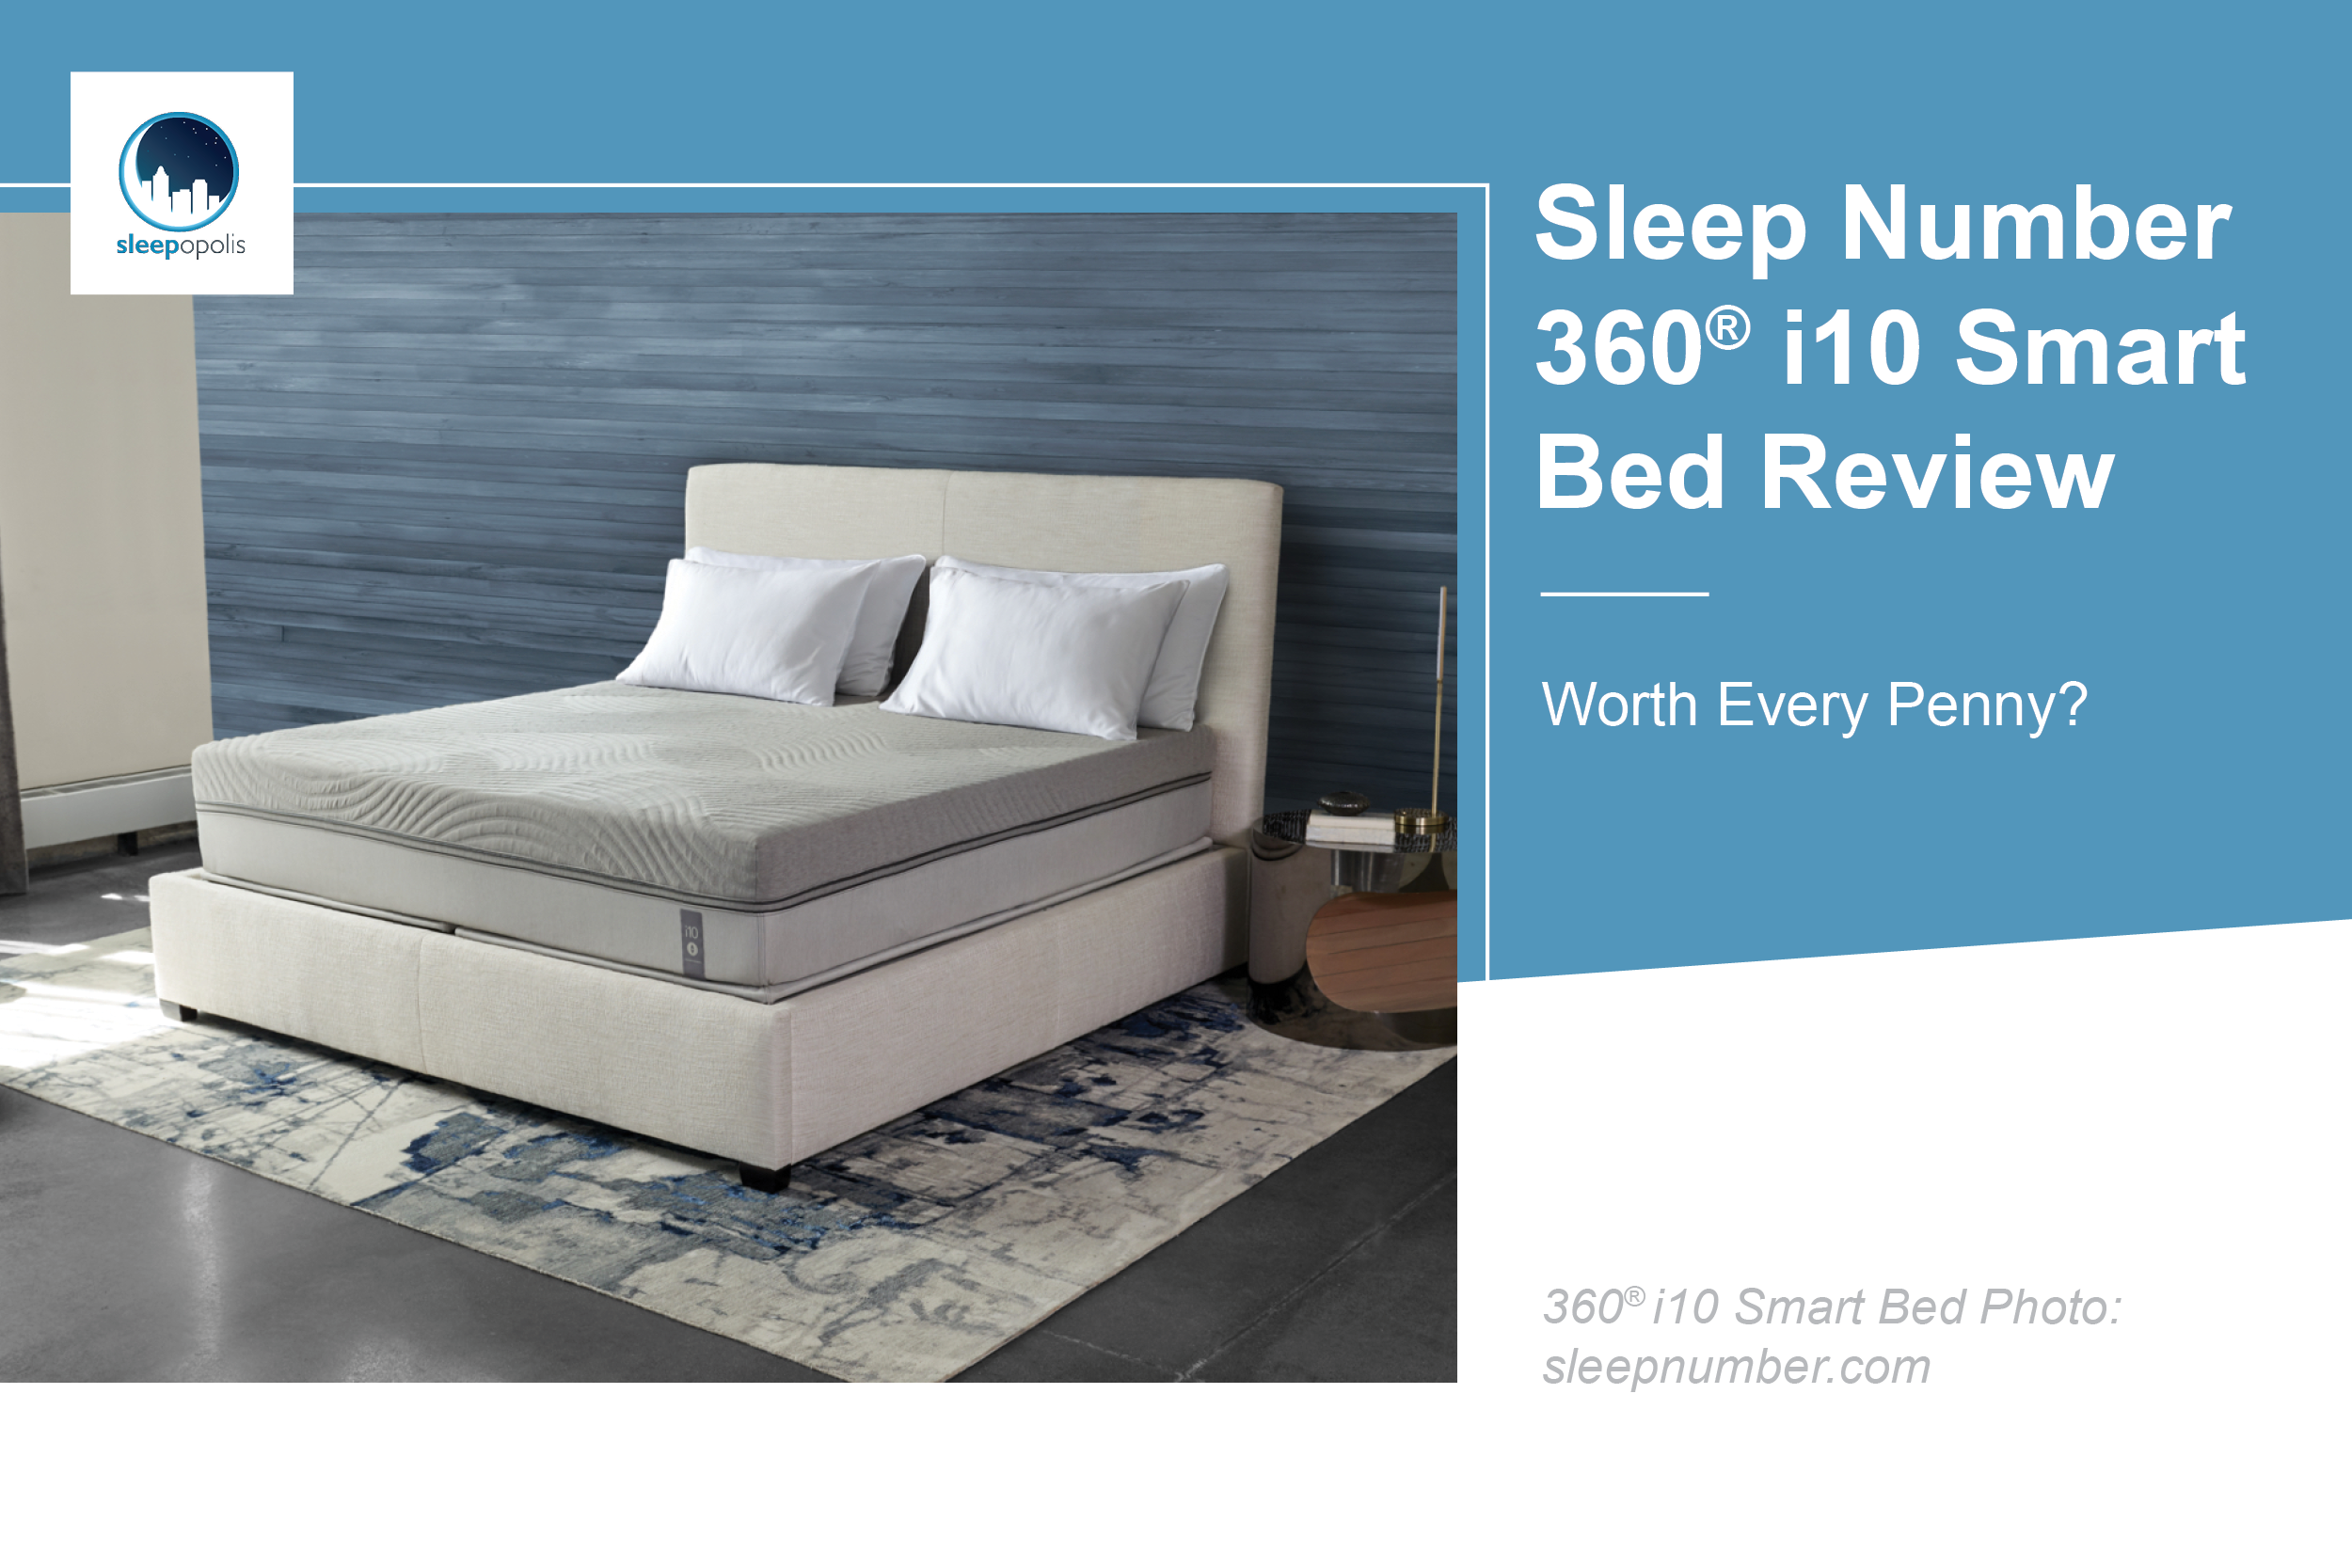 Sleep Number 360 I10 Review 2021, Sleep Number 360 Smart Bed Twin Size